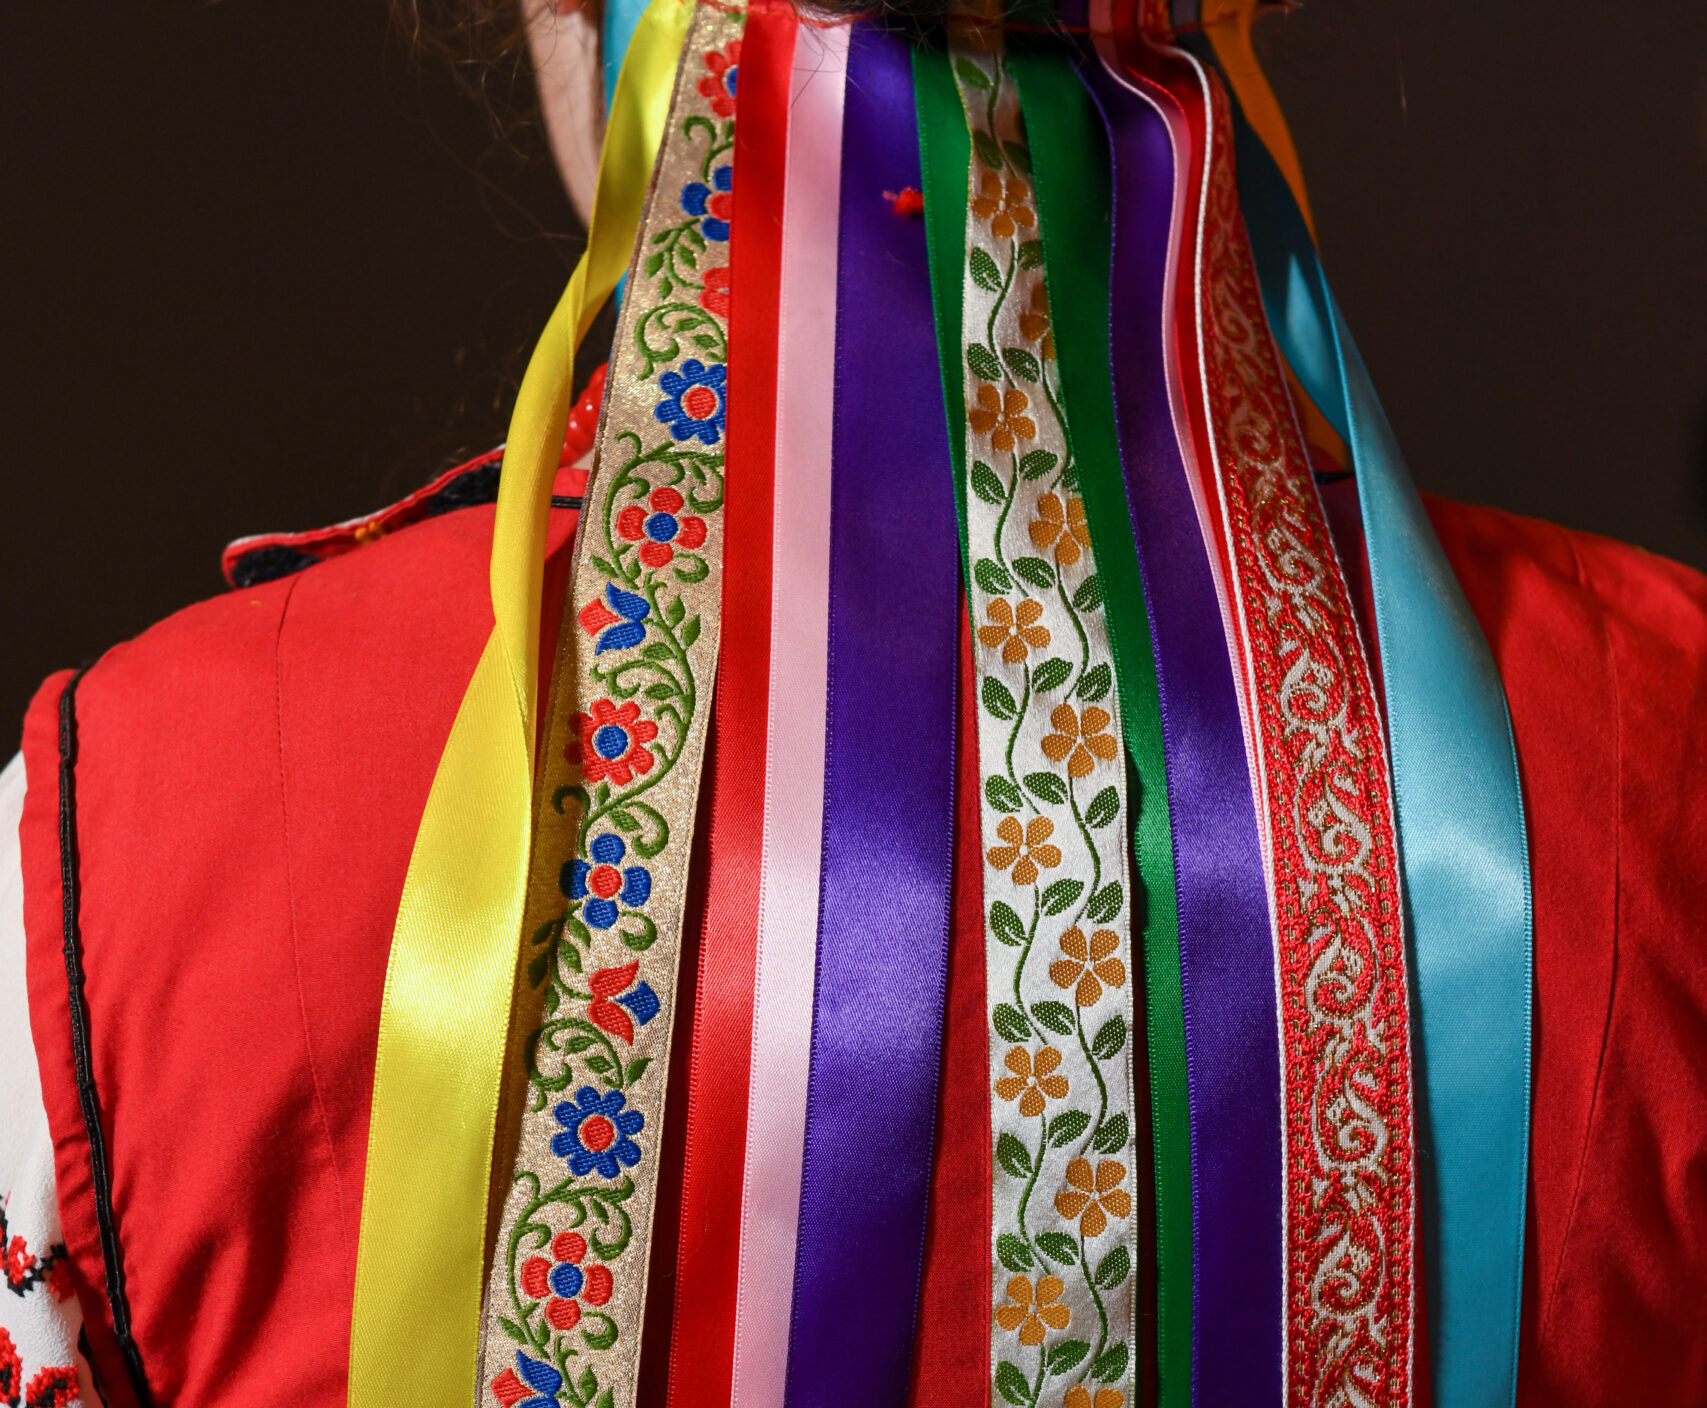 colorful ribbons hang from the bottom of a headpiece and fall from the dancer's neck down her back.